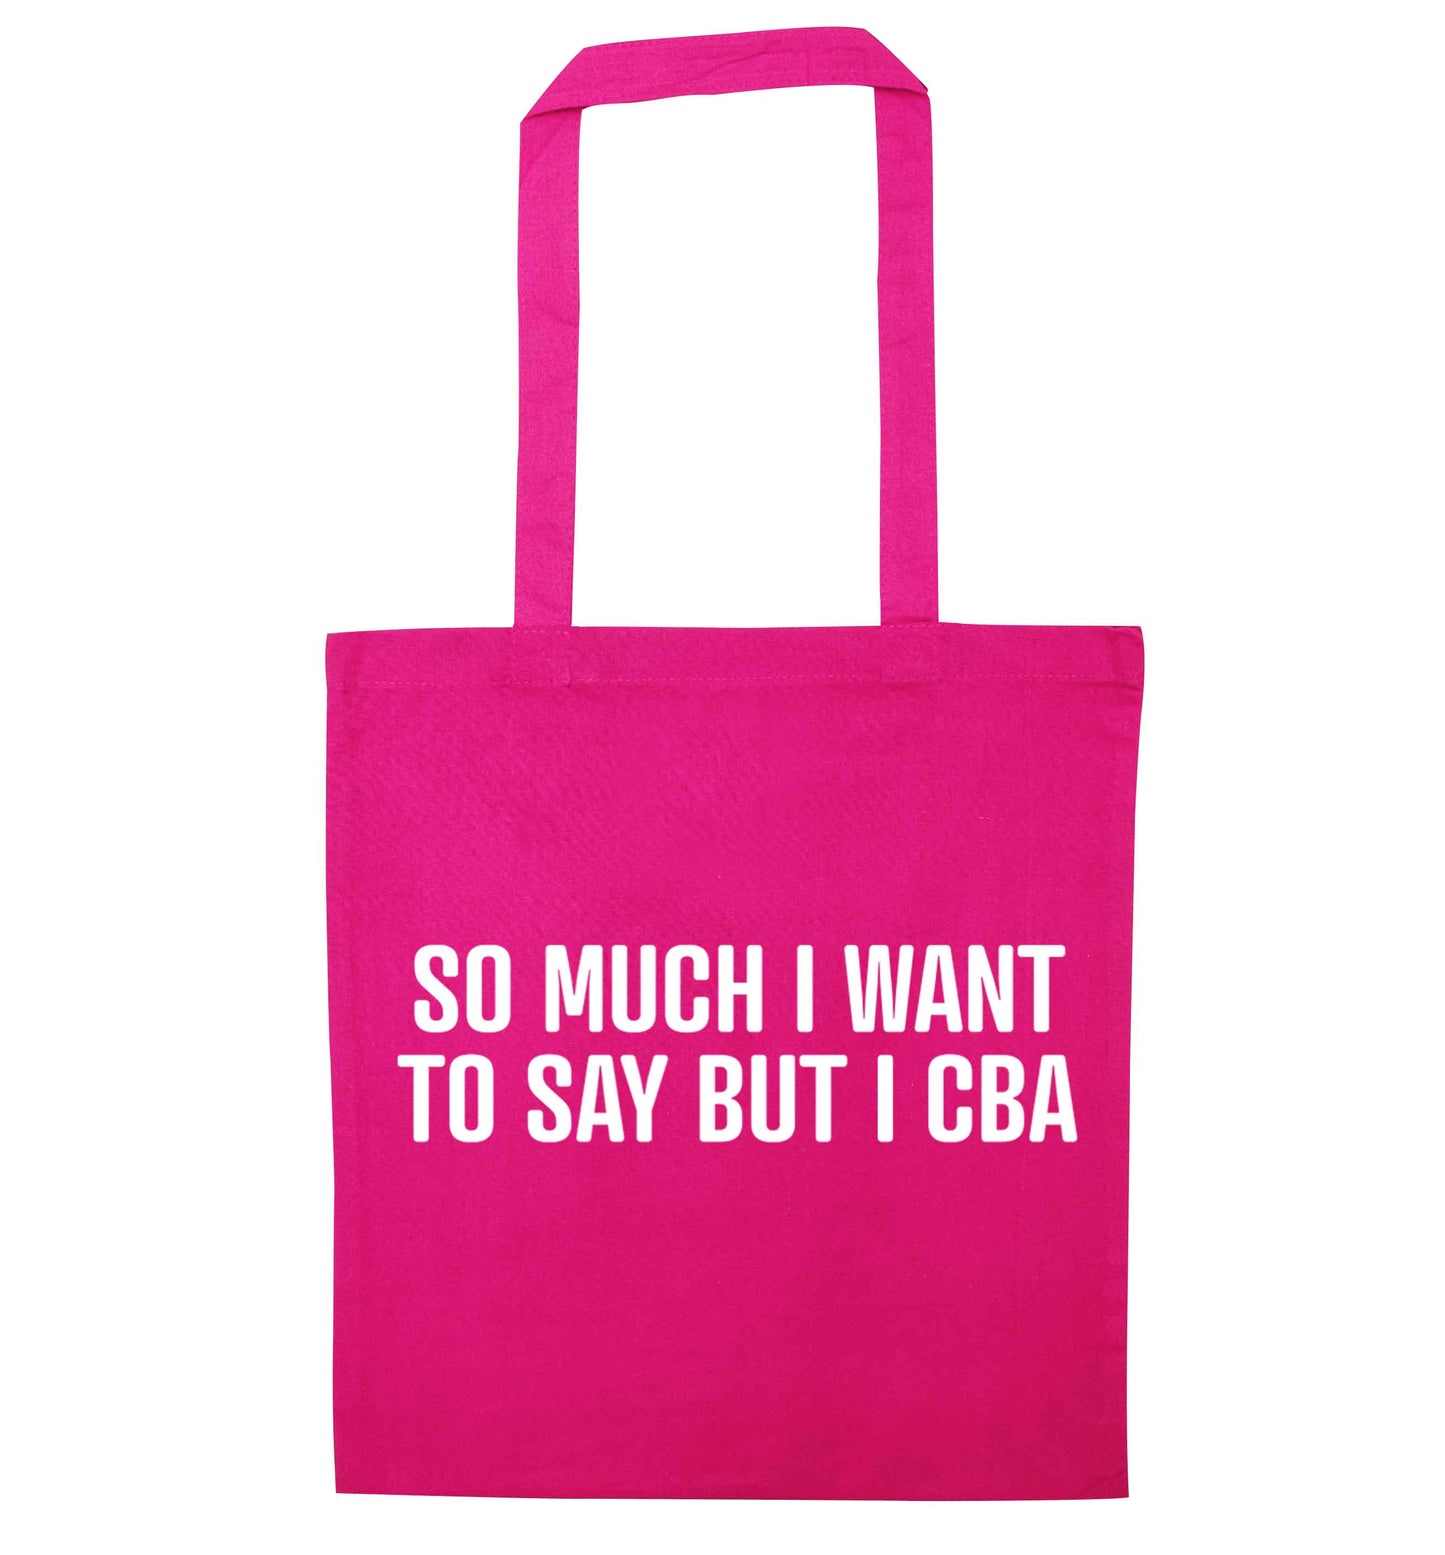 So much I want to say I cba  pink tote bag